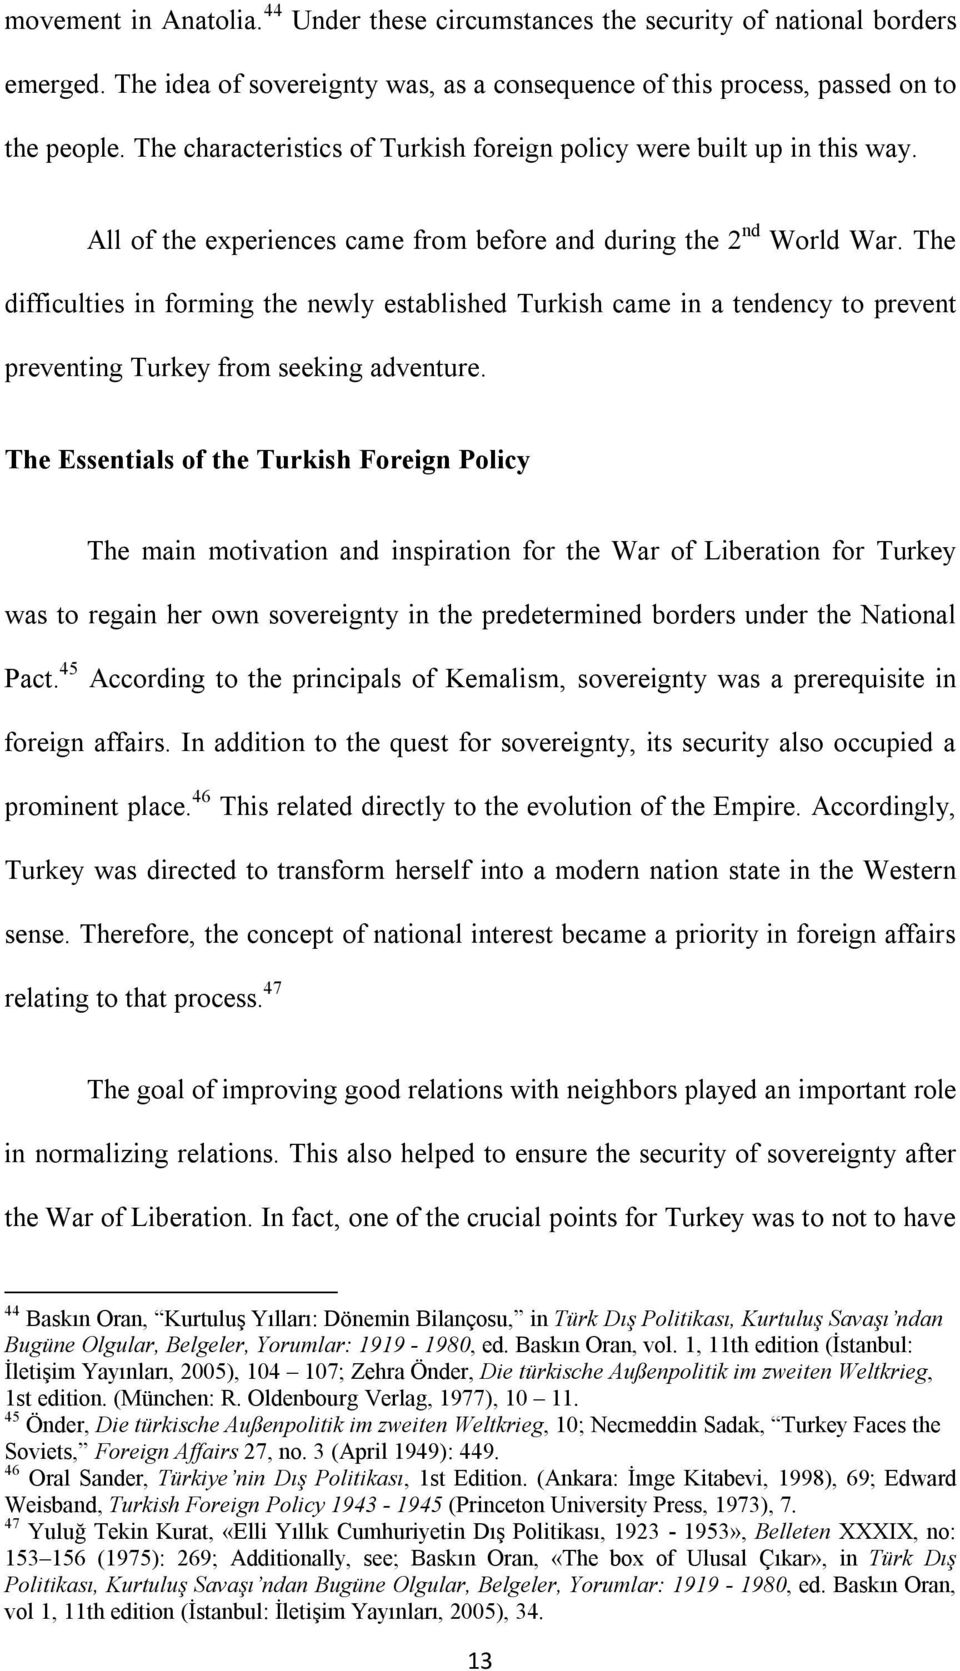 The difficulties in forming the newly established Turkish came in a tendency to prevent preventing Turkey from seeking adventure.